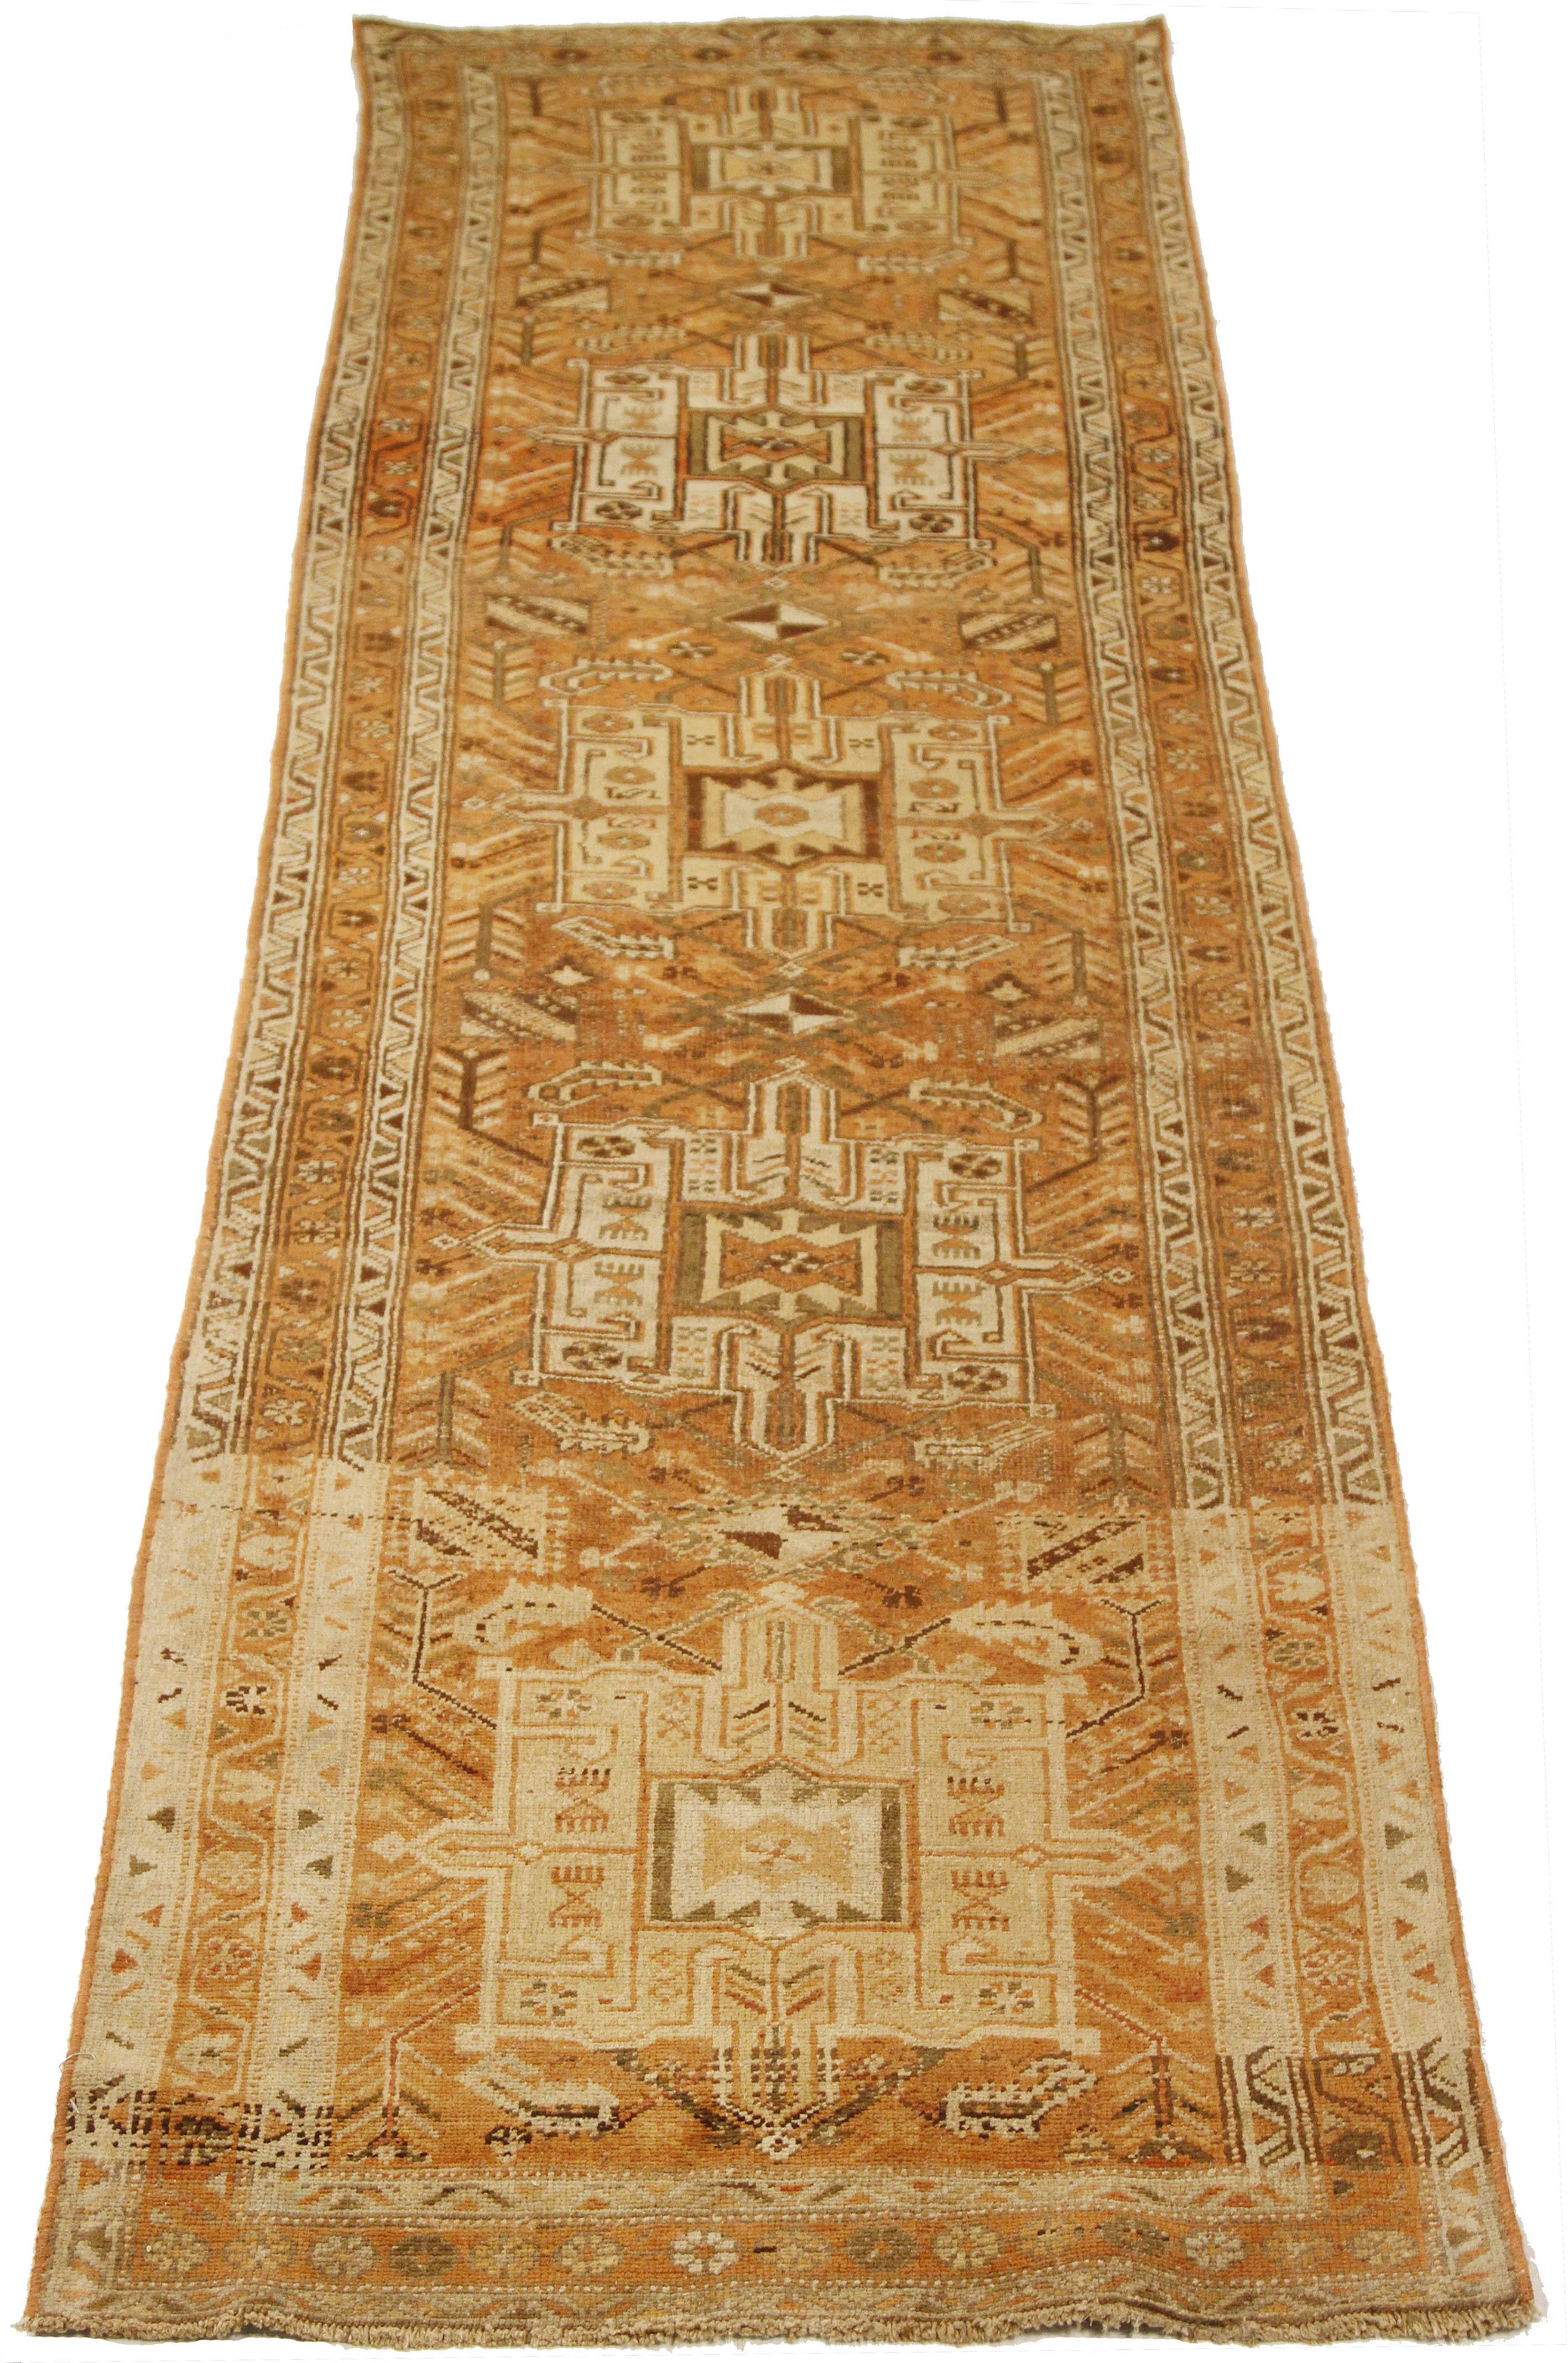 Antique Persian runner rug handwoven from the finest sheep’s wool and colored with all-natural vegetable dyes that are safe for humans and pets. It’s a traditional Heriz design featuring a lovely field covered with ivory and brown tribal design